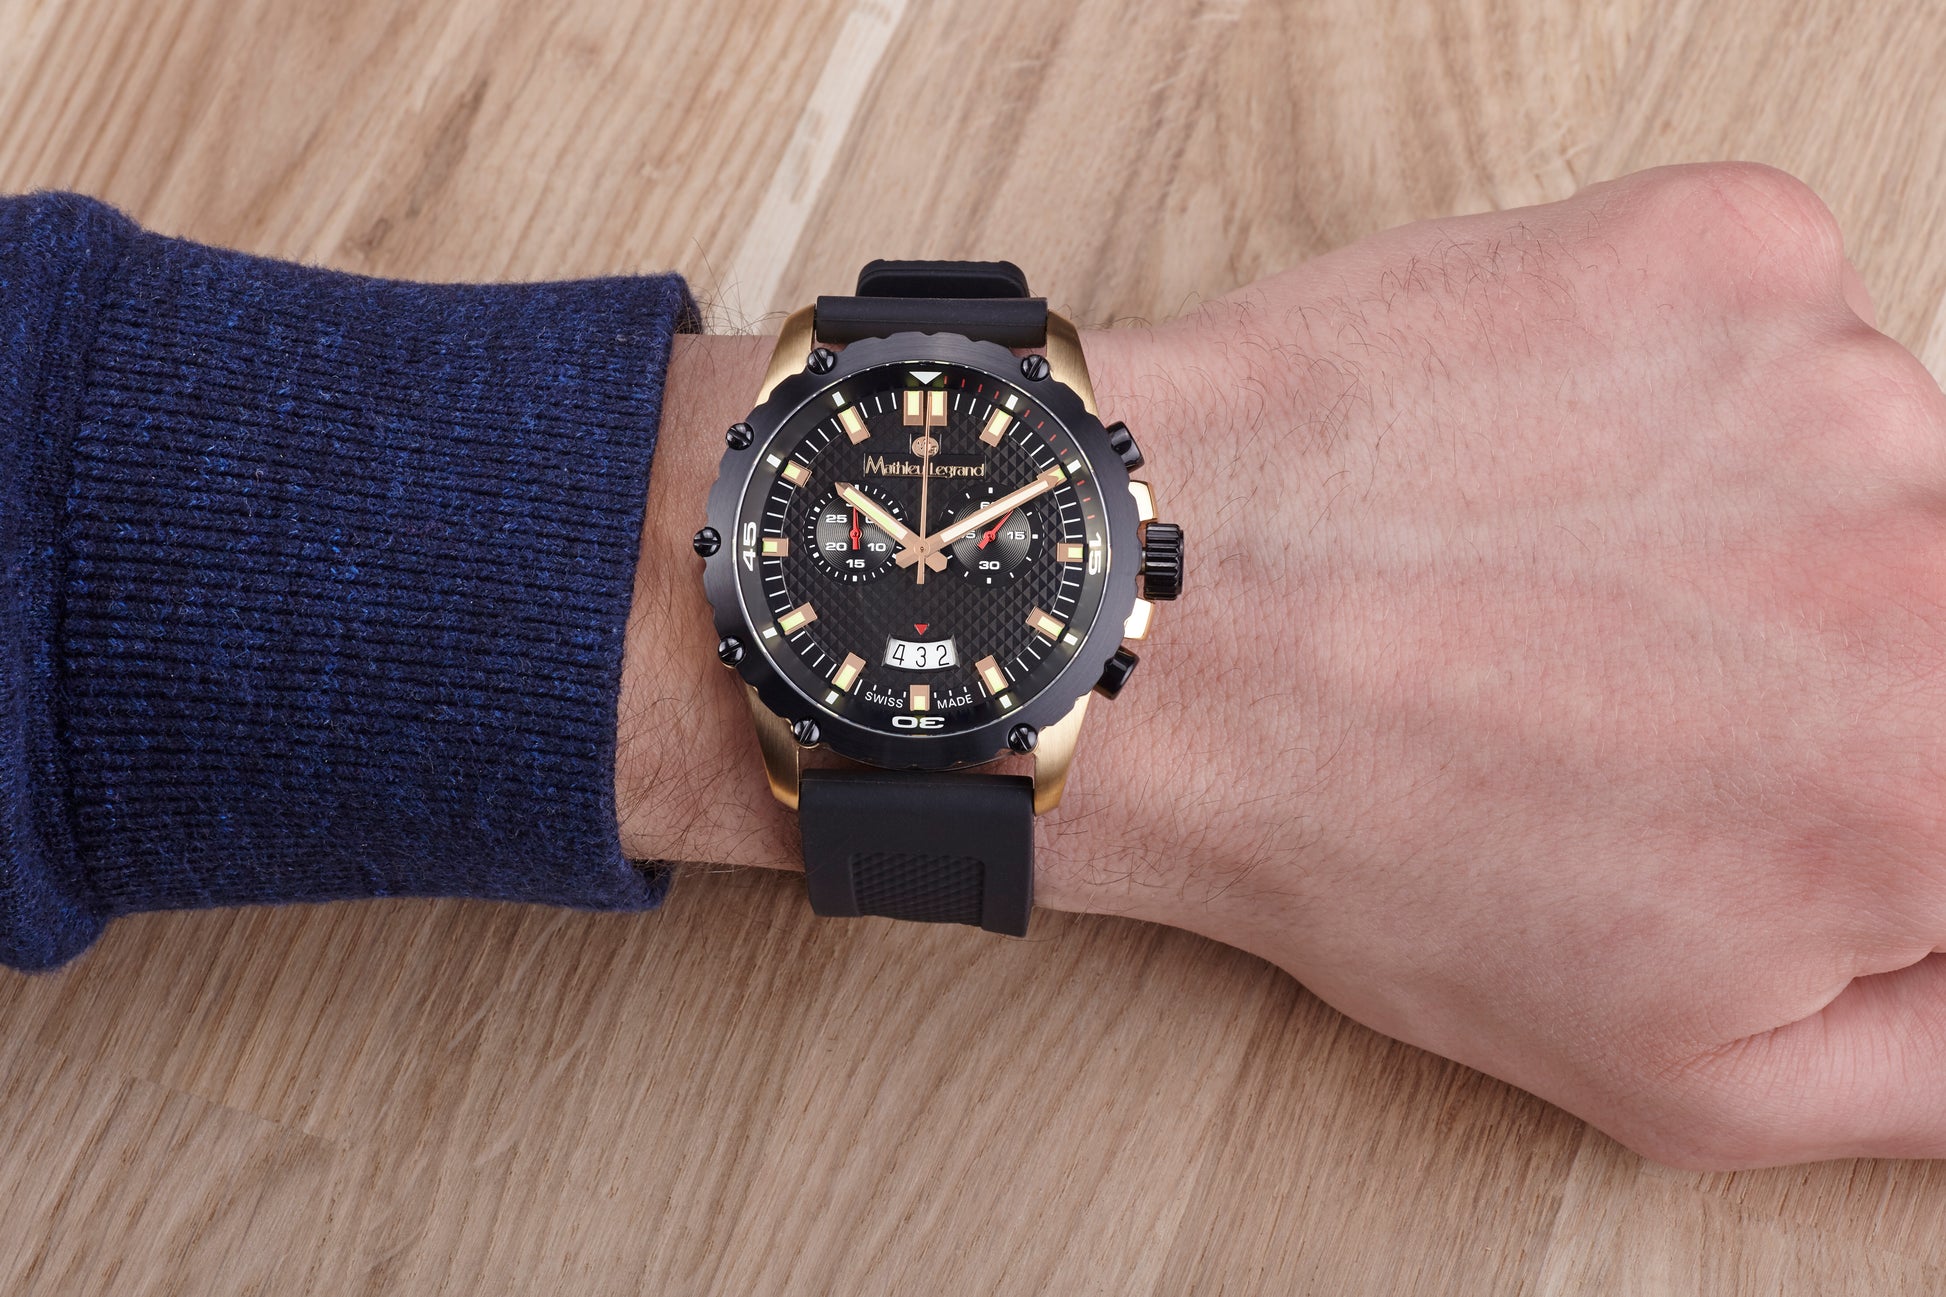 Automatic watches — Source Puissante — Mathieu Legrand — two tone black IP gold